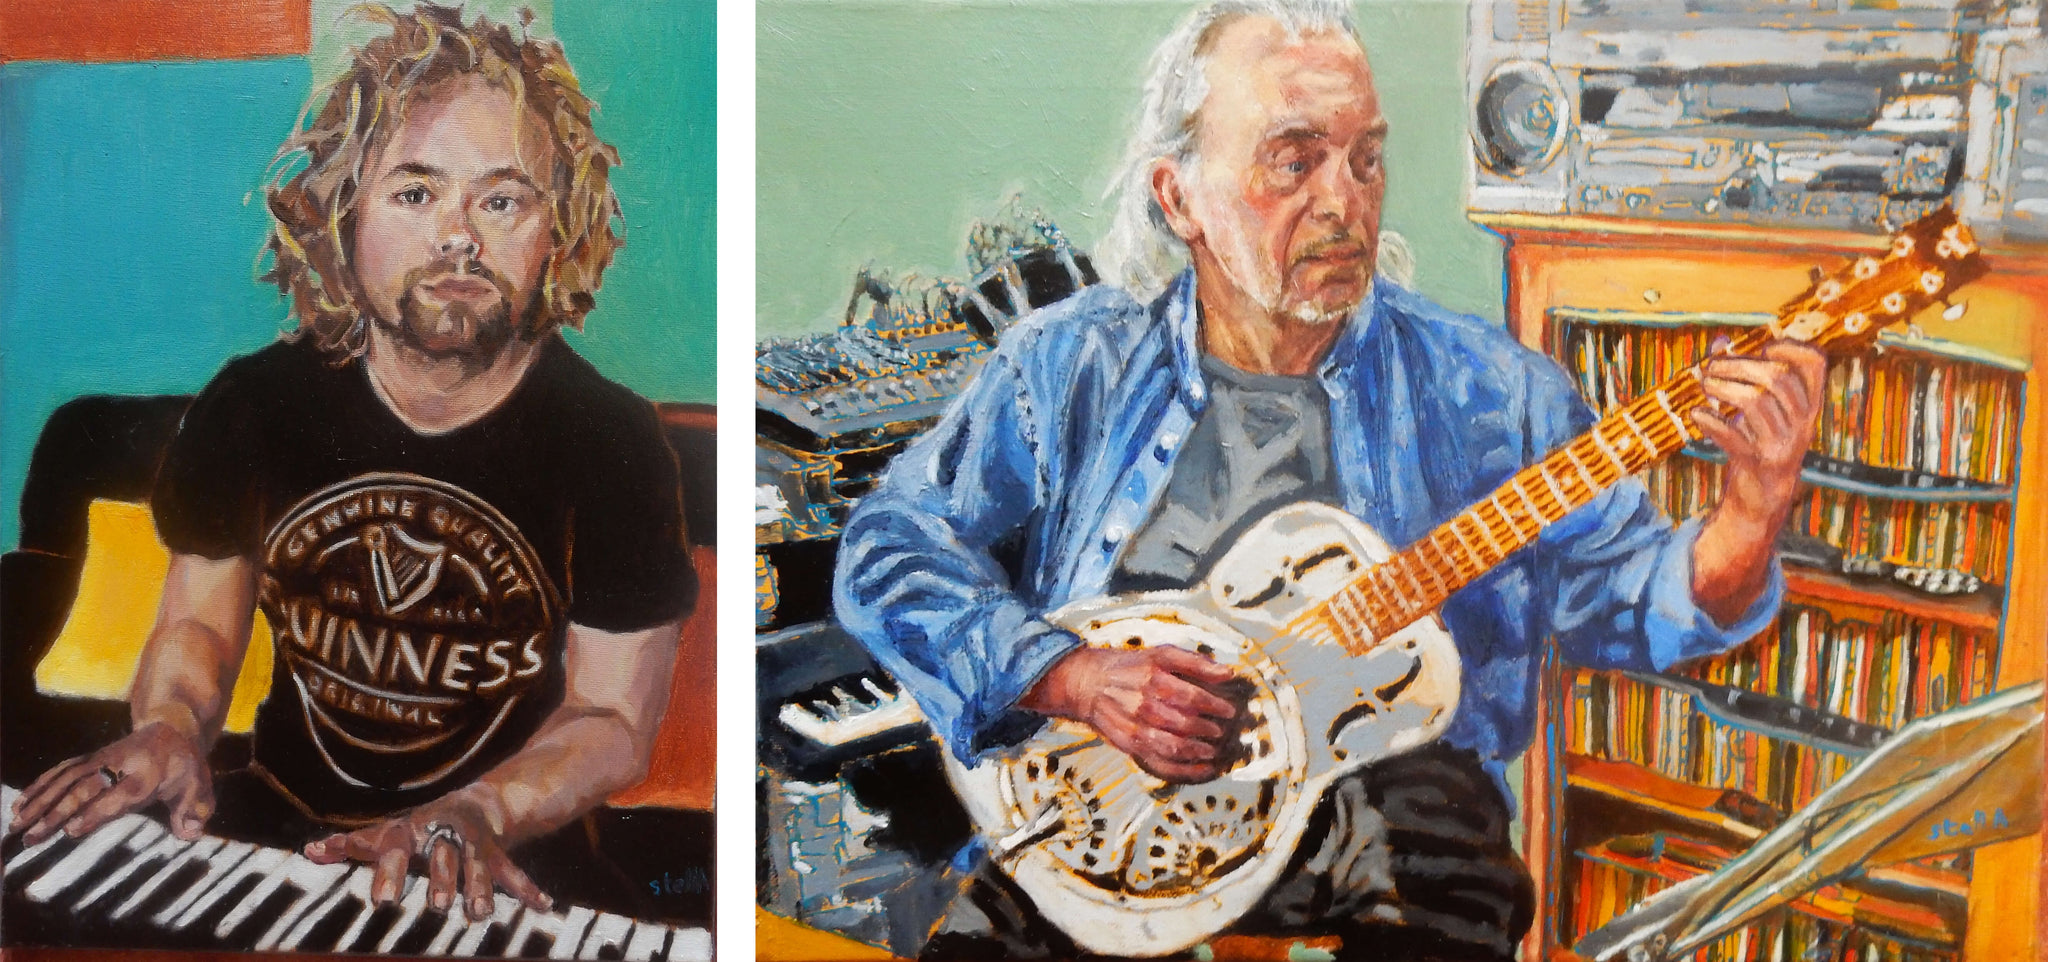 Musicians Marky Dawson and Robert Hokum performing online oil portraits on canvas by Stella Tooth lockdown musician series